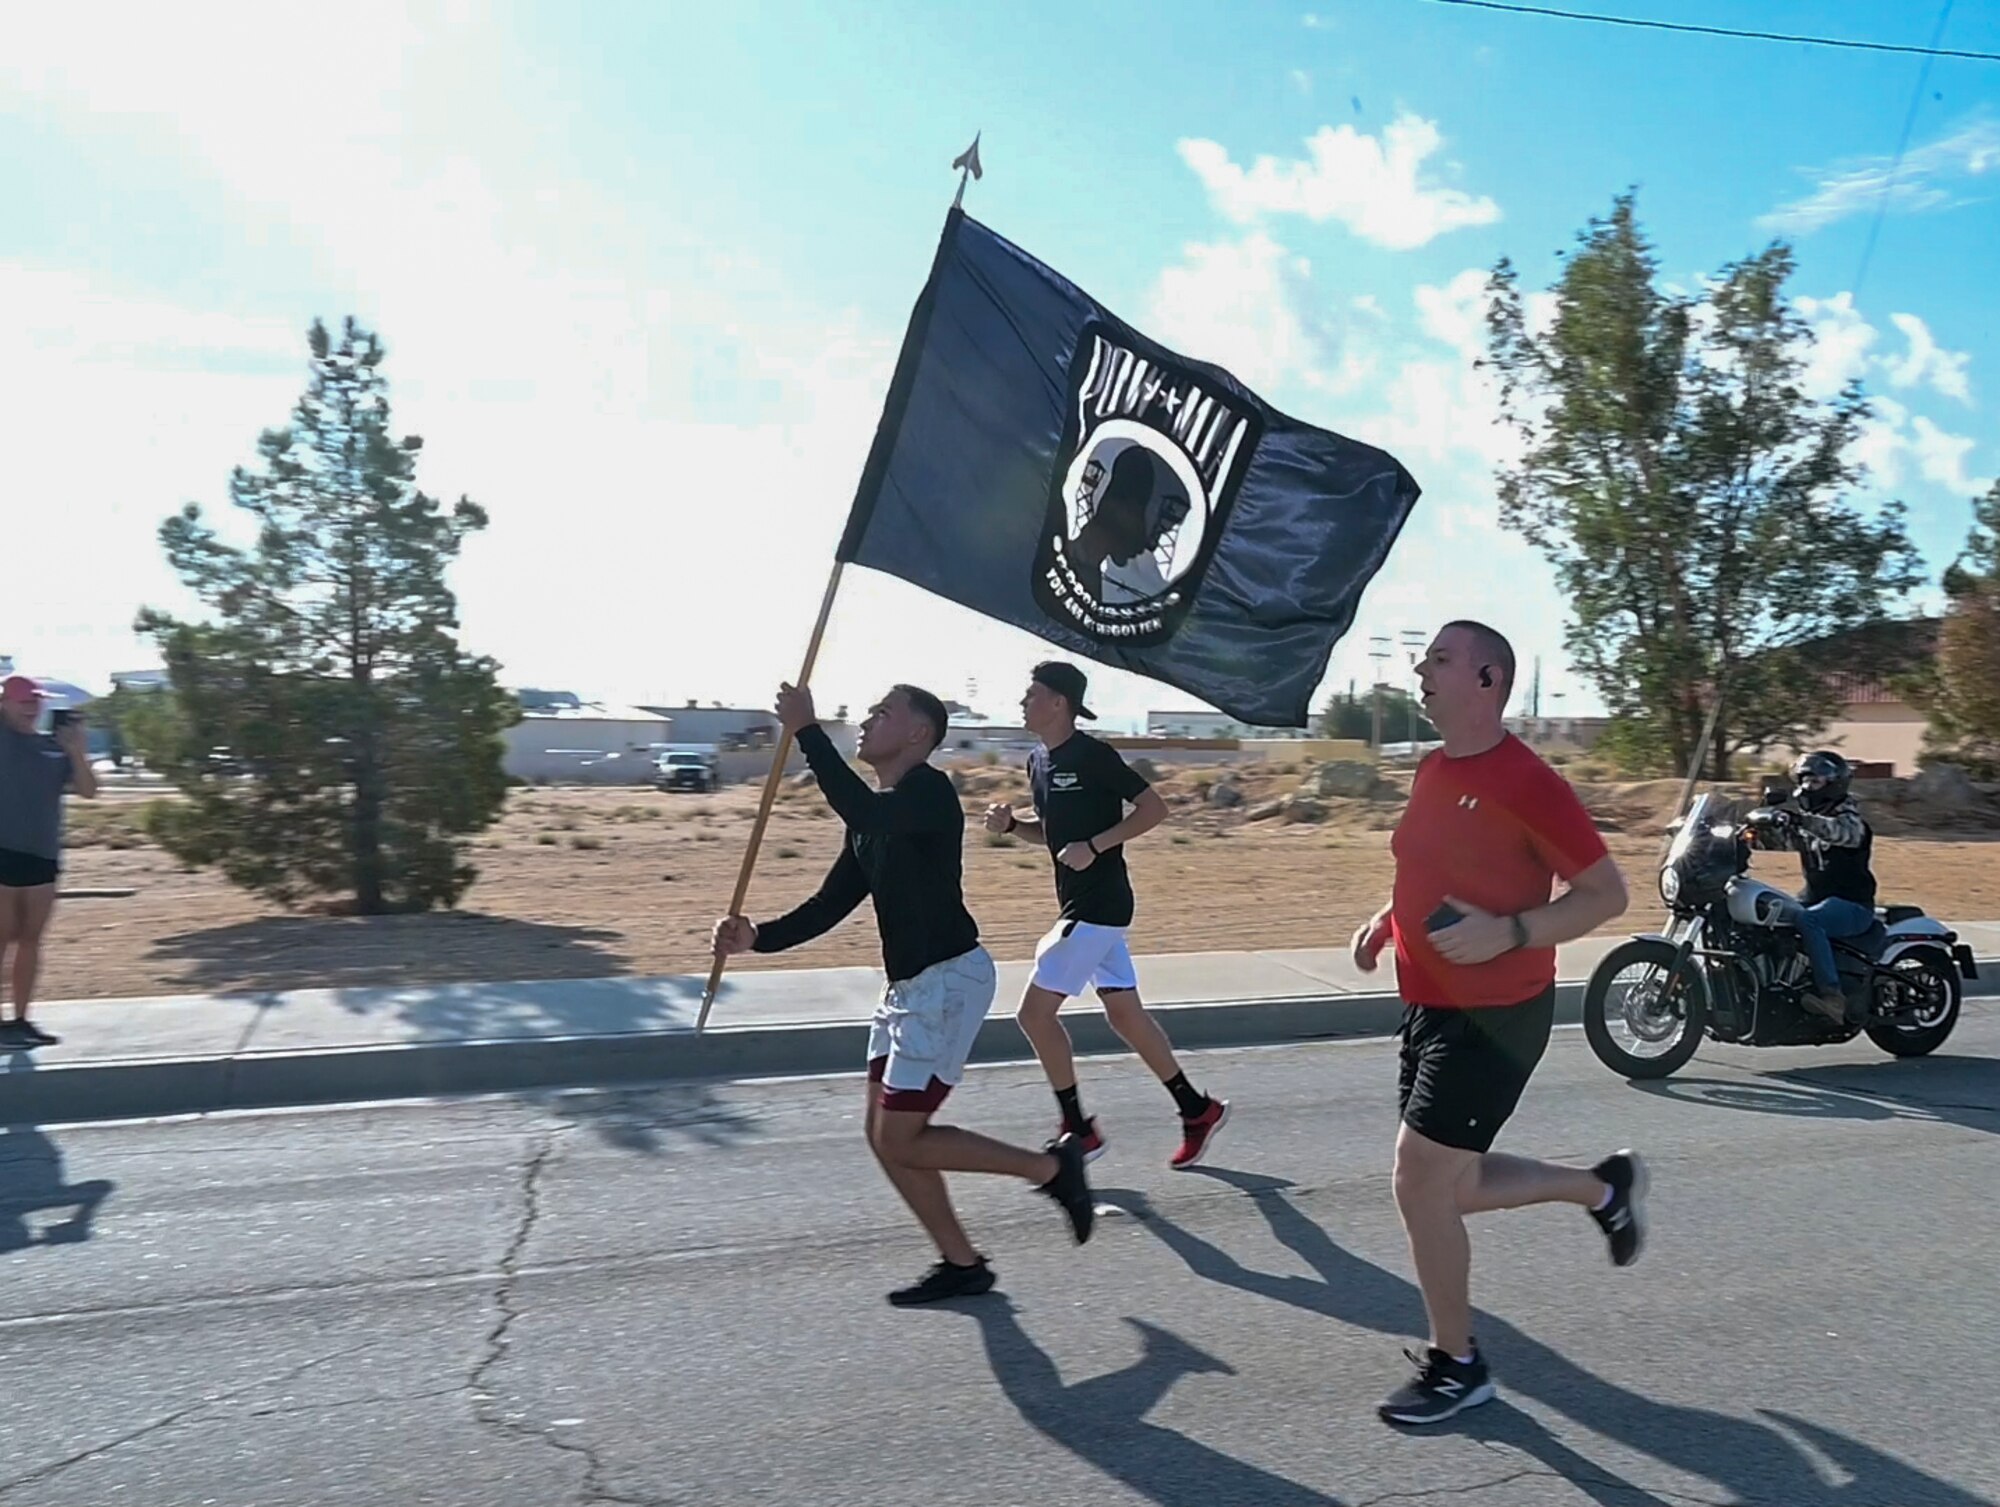 Over 83,000 service members are still missing in action from America's conflicts. To honor those who have sacrificed so much, Edwards Air Force Base held a POW/MIA Remembrance Run.